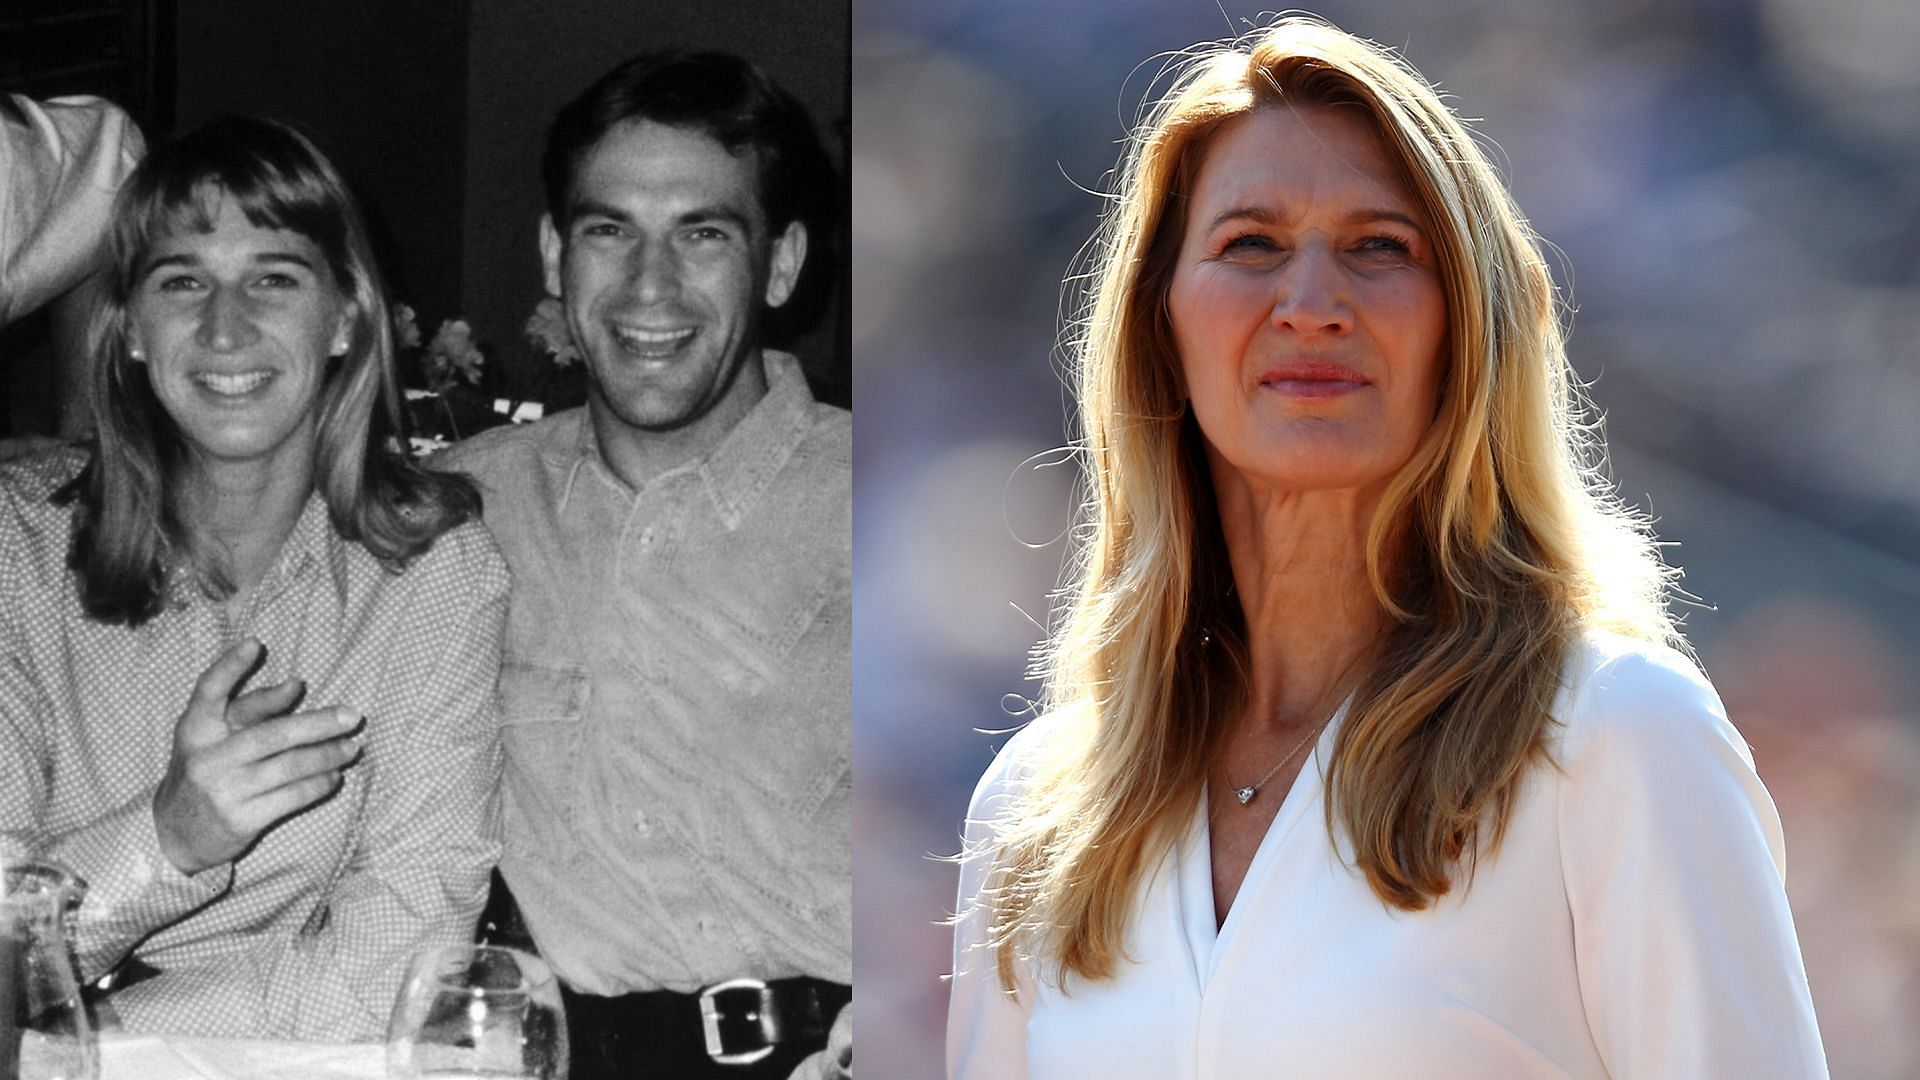 Steffi Graf dated Michael Bartels for seven years